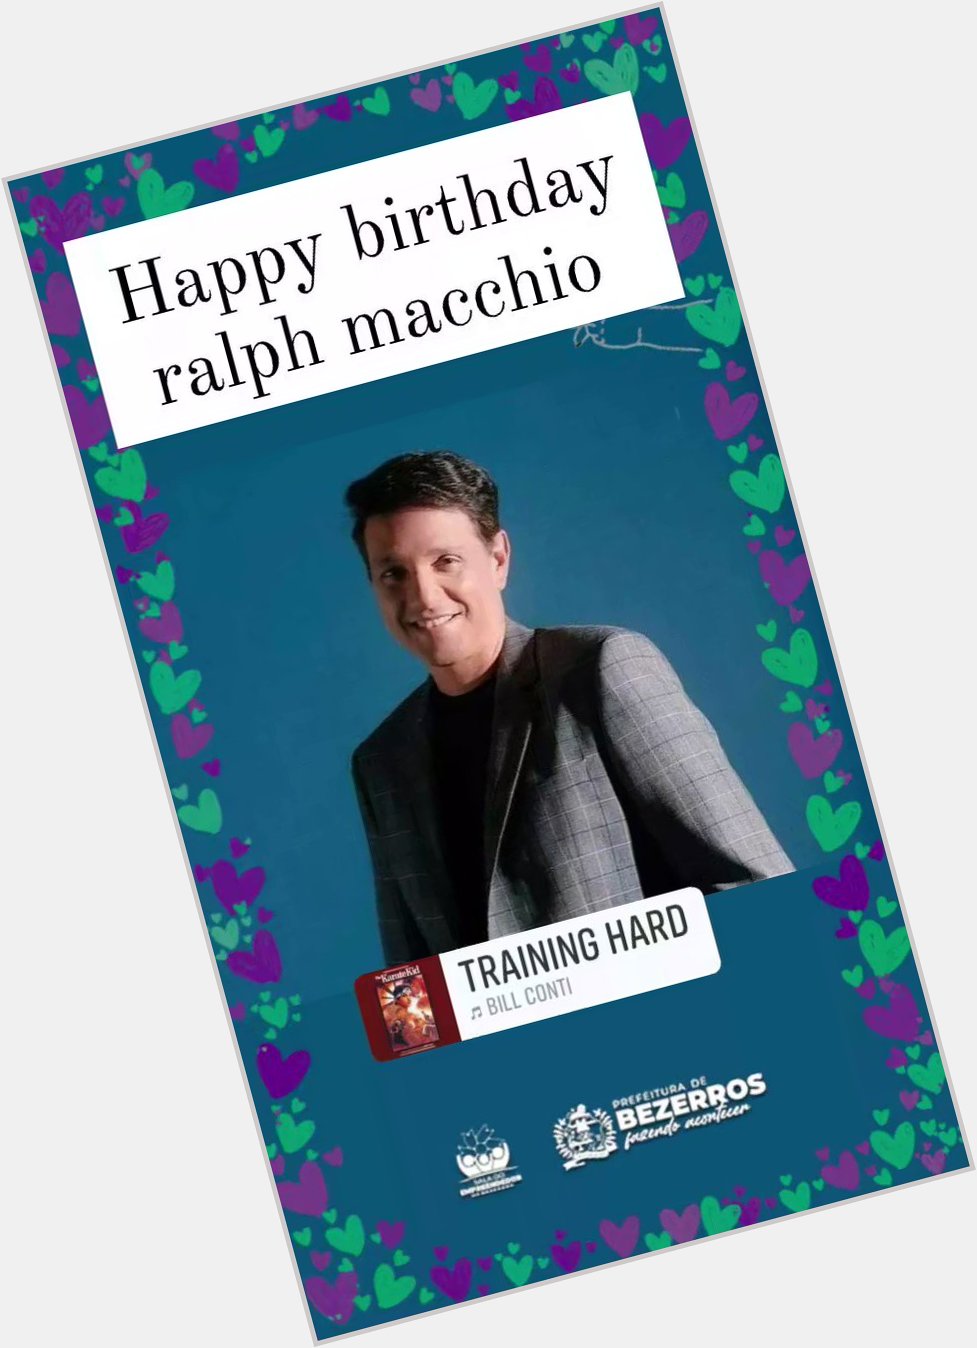 Happy birthday ralph macchio have a awesome day    